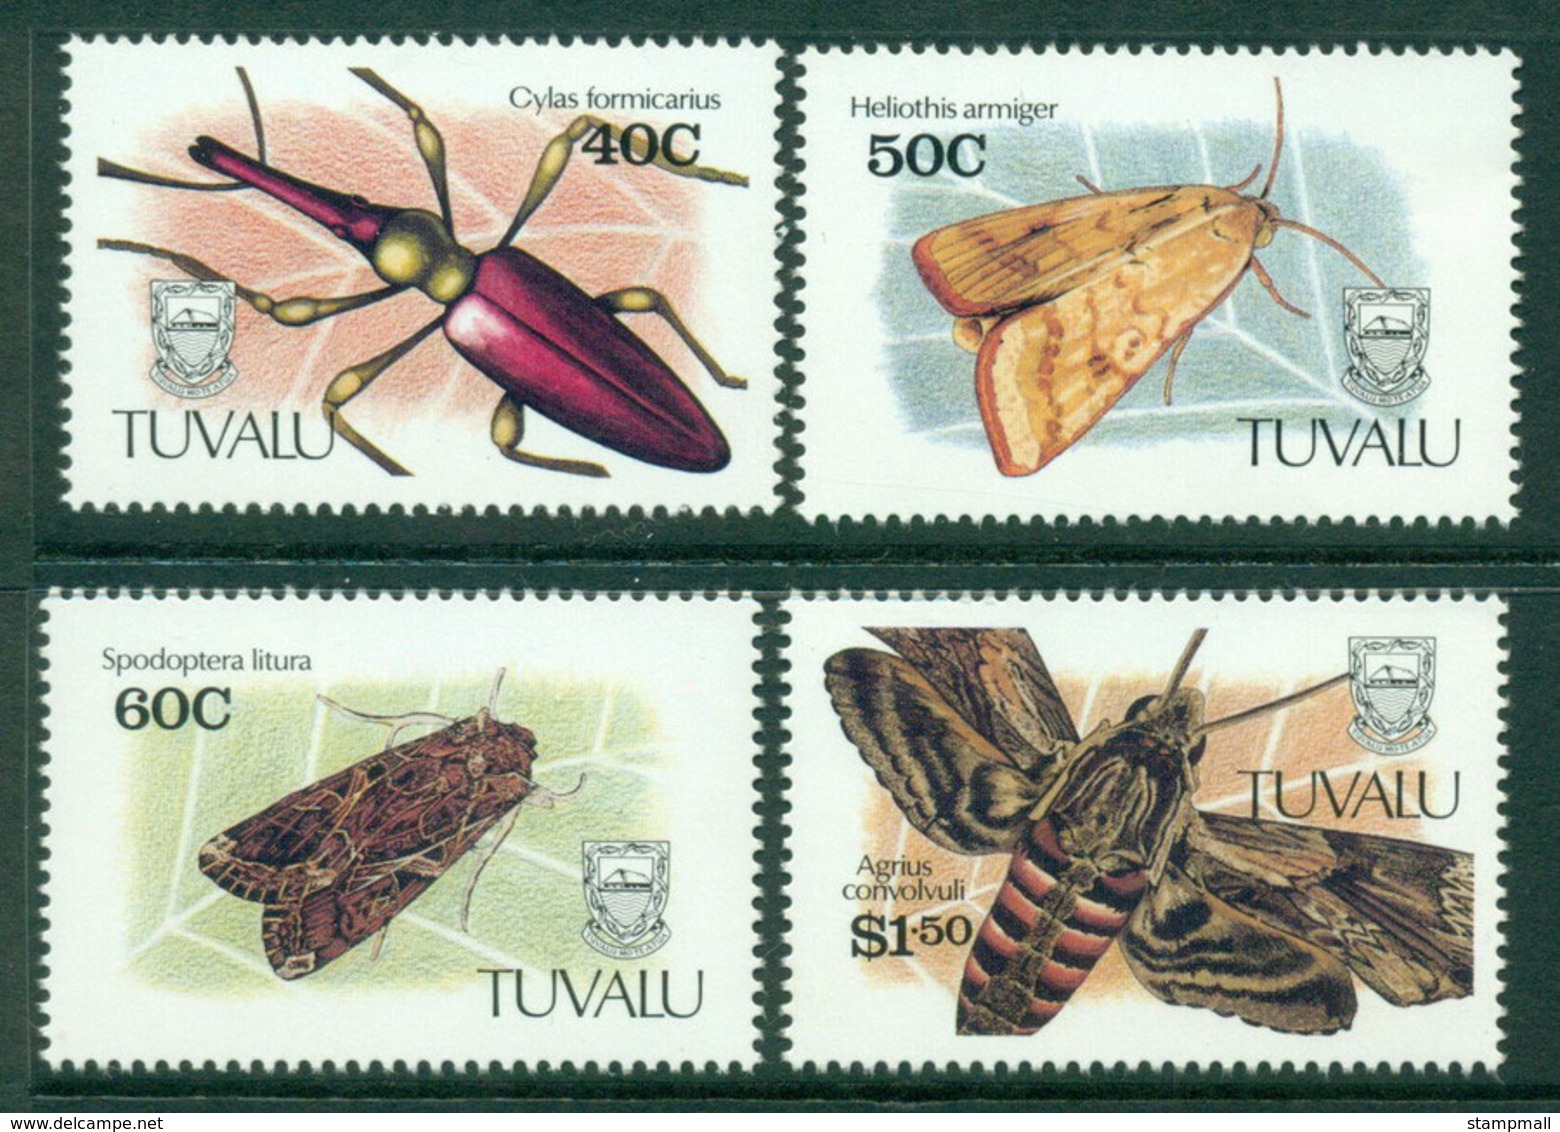 Tuvalu 1991 Insects MUH Lot20428 - Tuvalu